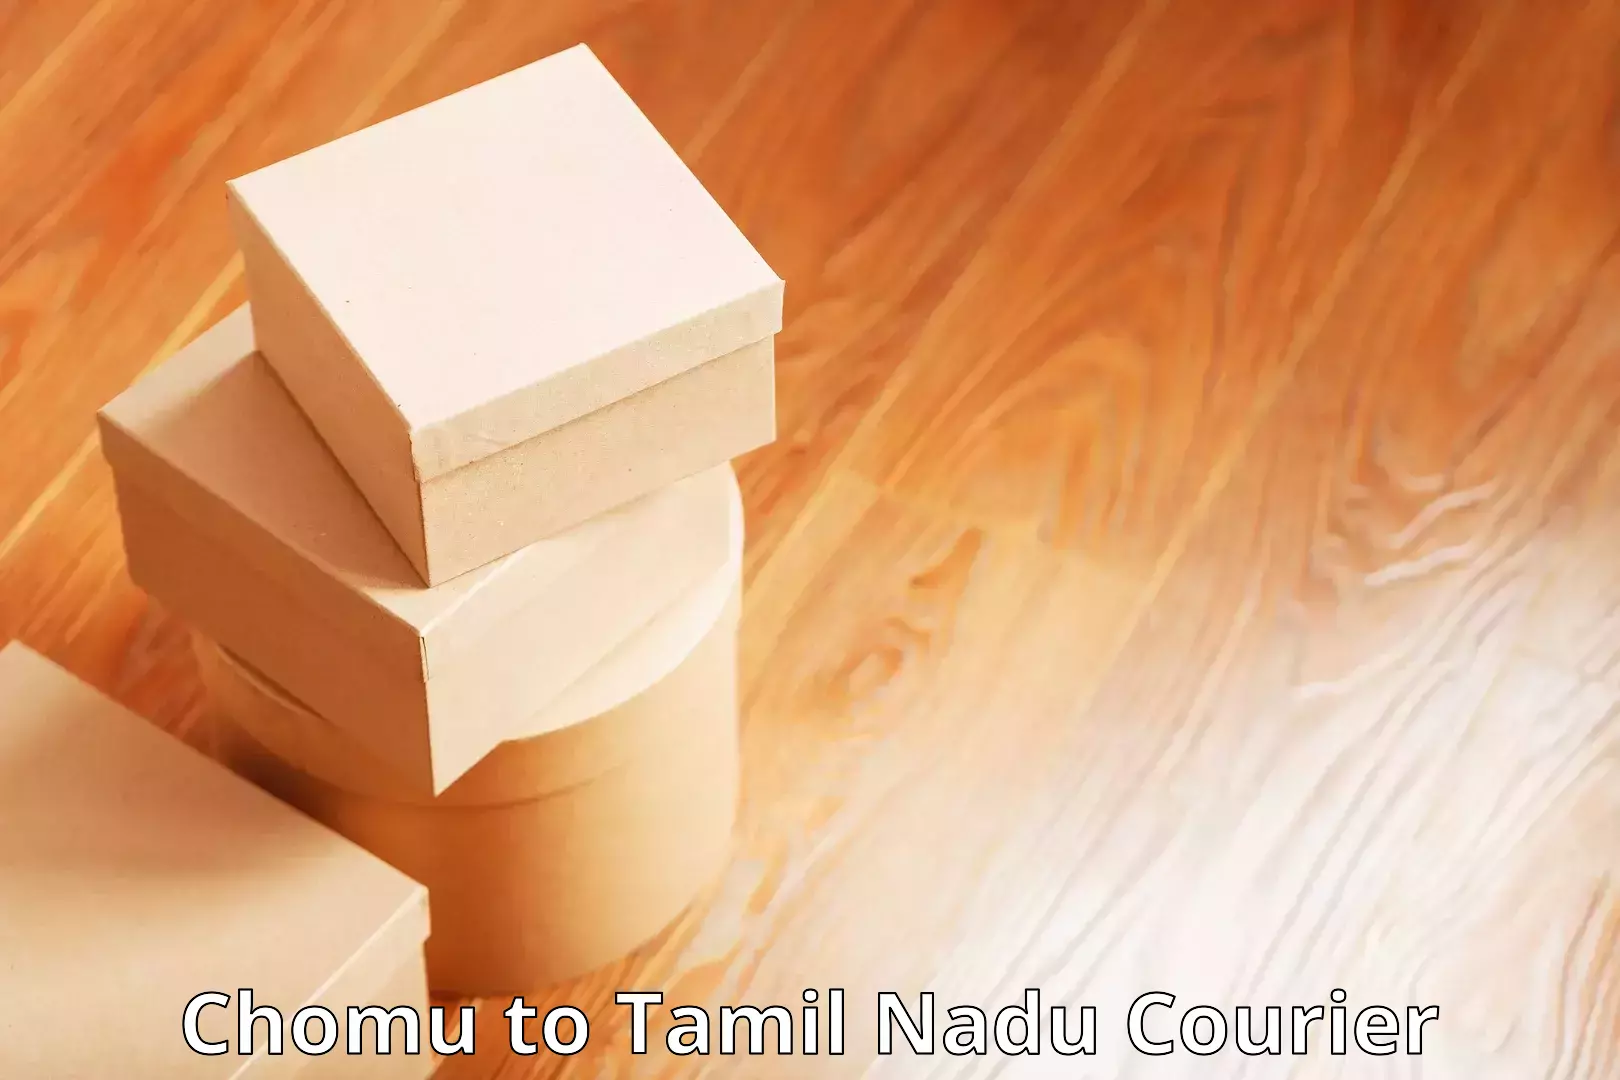 24-hour courier services Chomu to Tamil Nadu